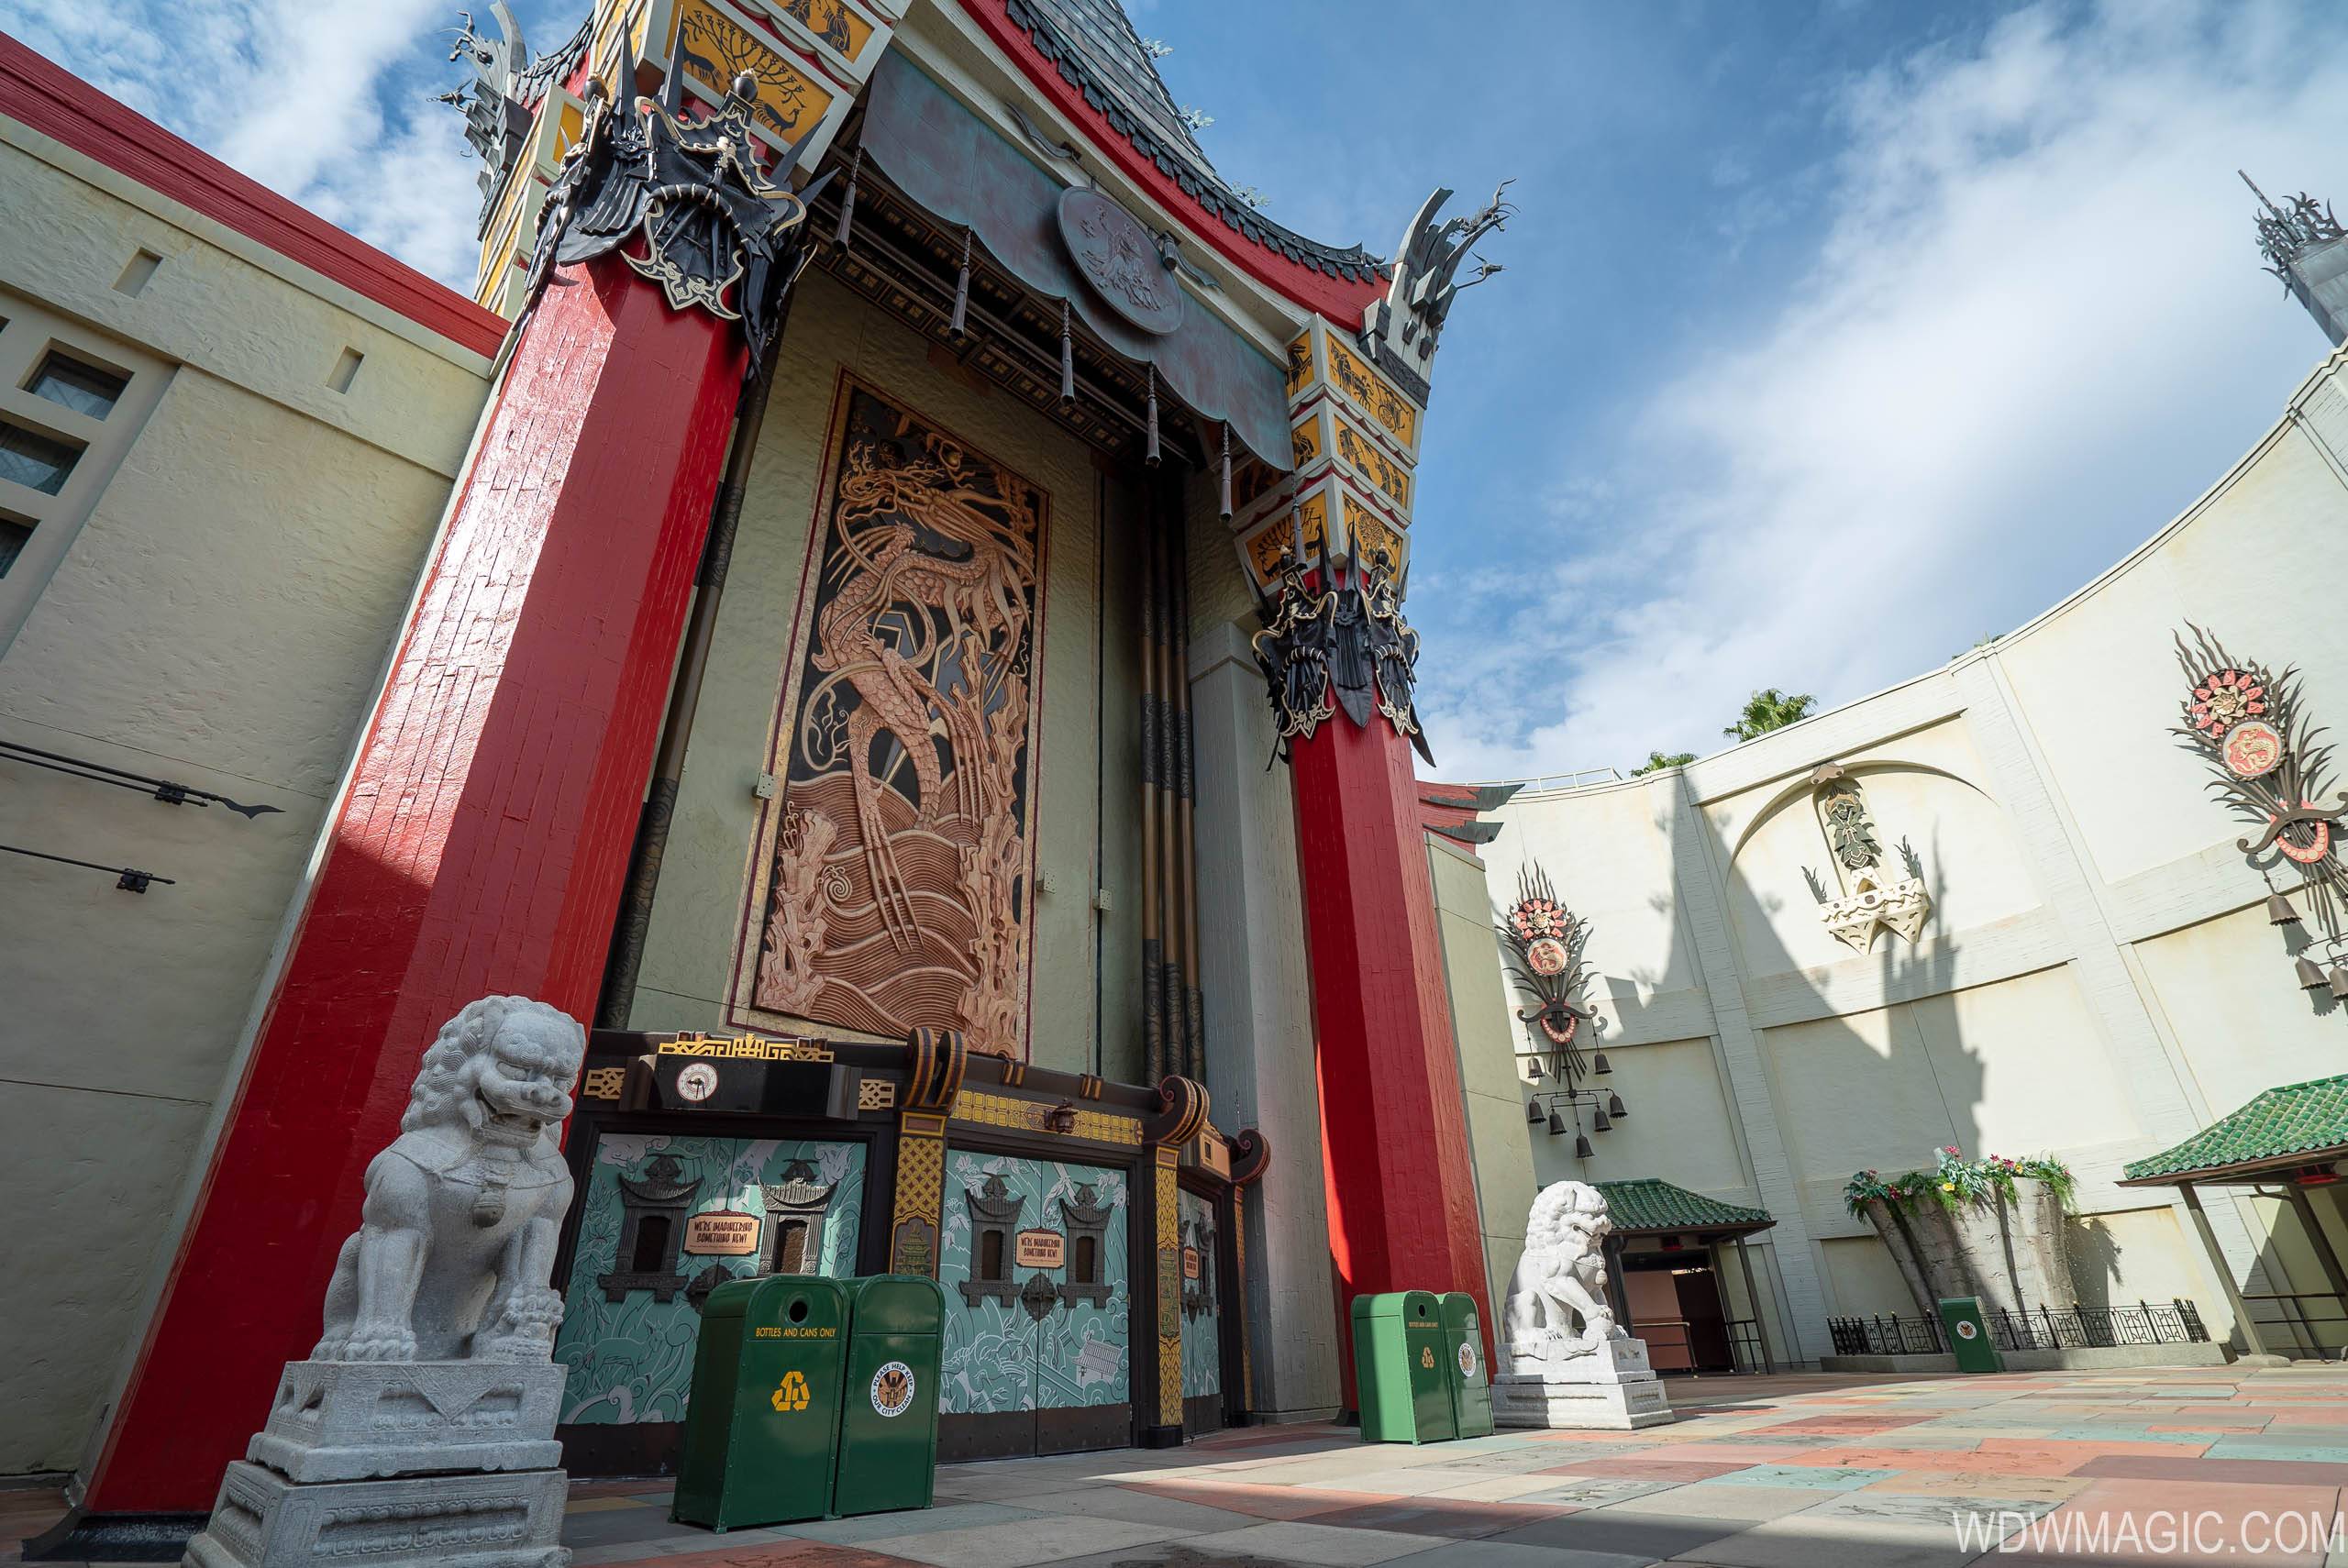 Walls down at the Chinese Theater